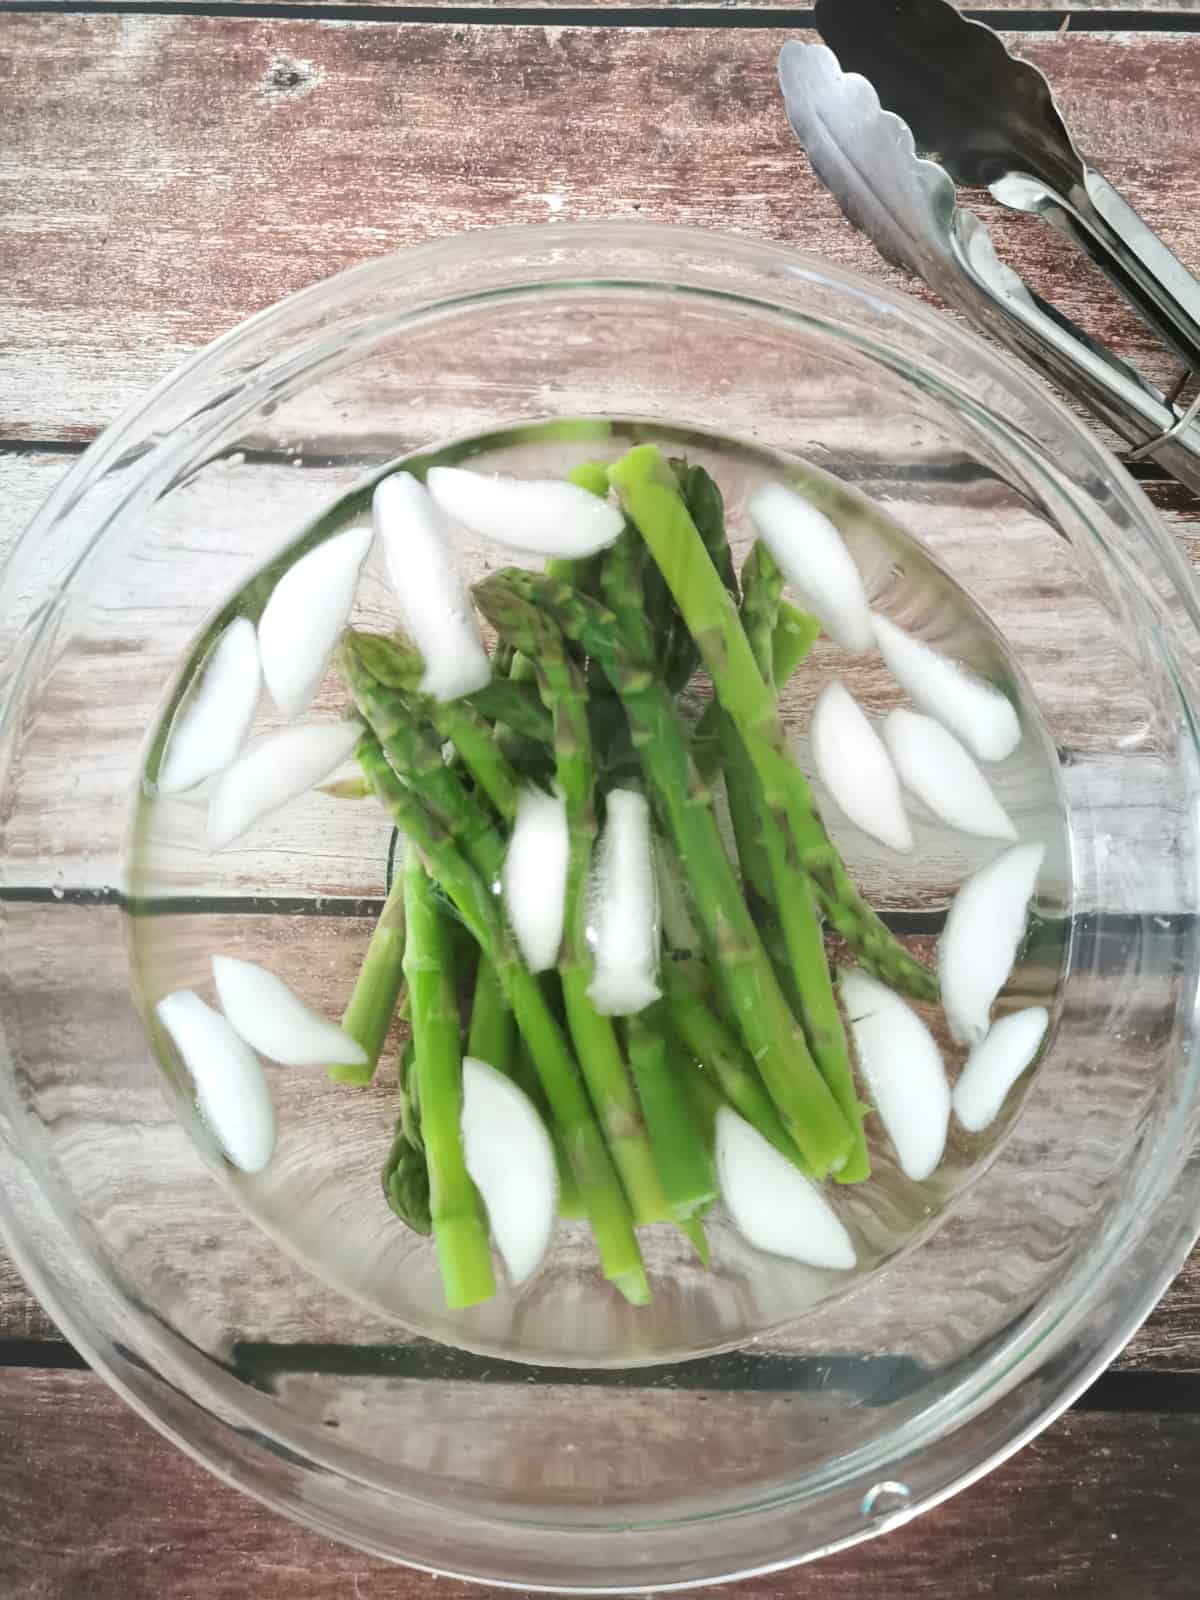 blanched asparagus in a large mixing bowl filled with cold water and ice.